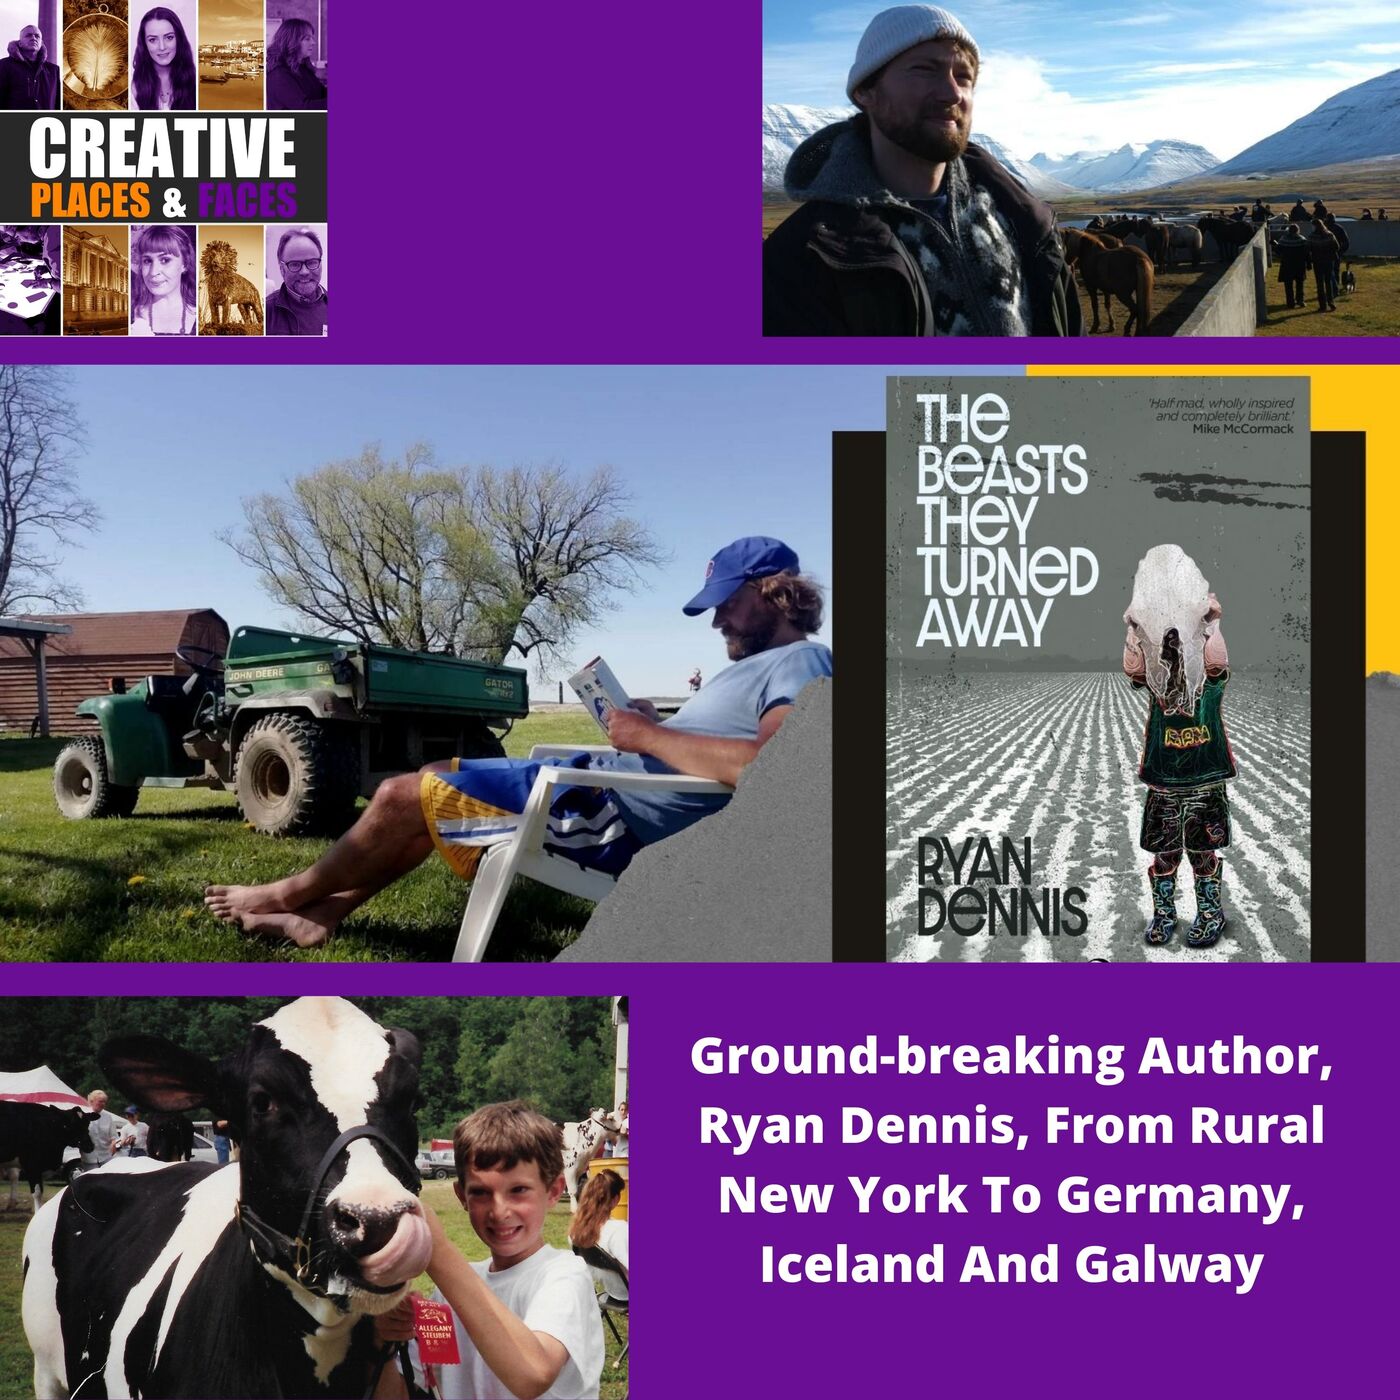 Ground-breaking Author, Ryan Dennis, From Rural New York To Germany, Iceland And Galway